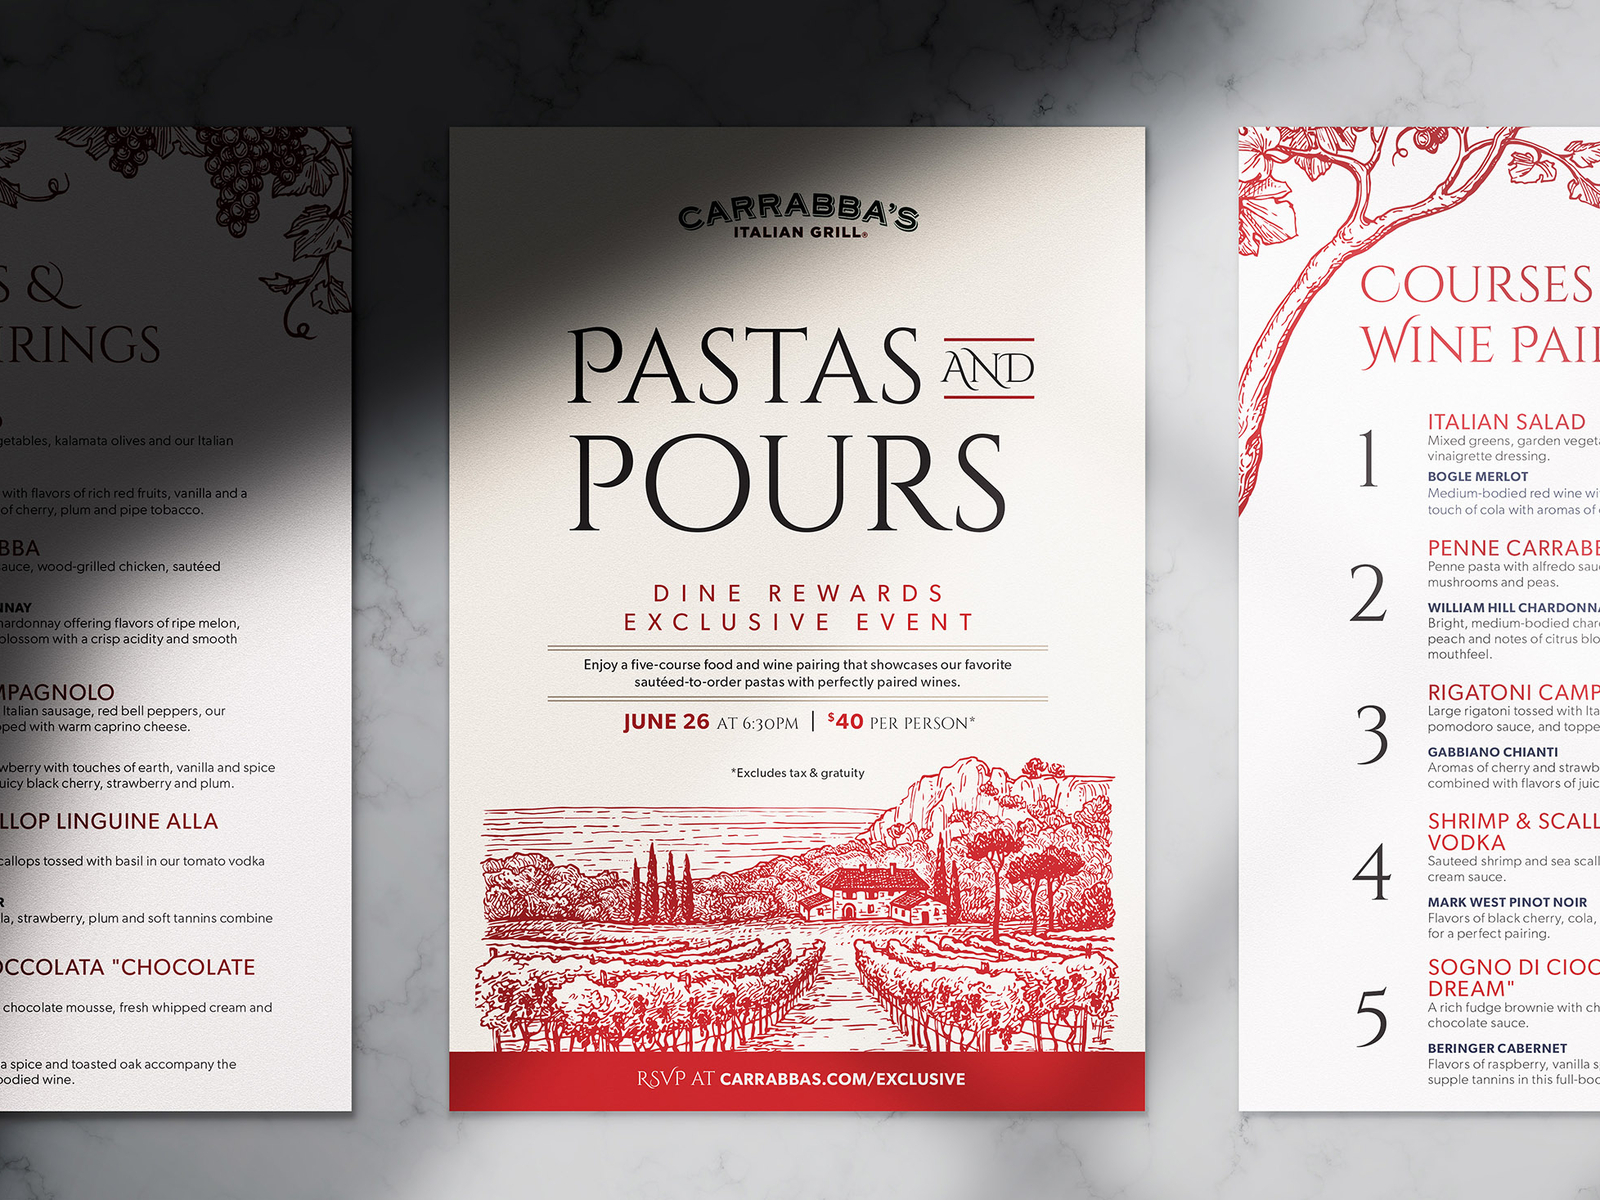 Carrabba's Pasta & Pours Wine Dinner Invite by Aurum Creative on Dribbble